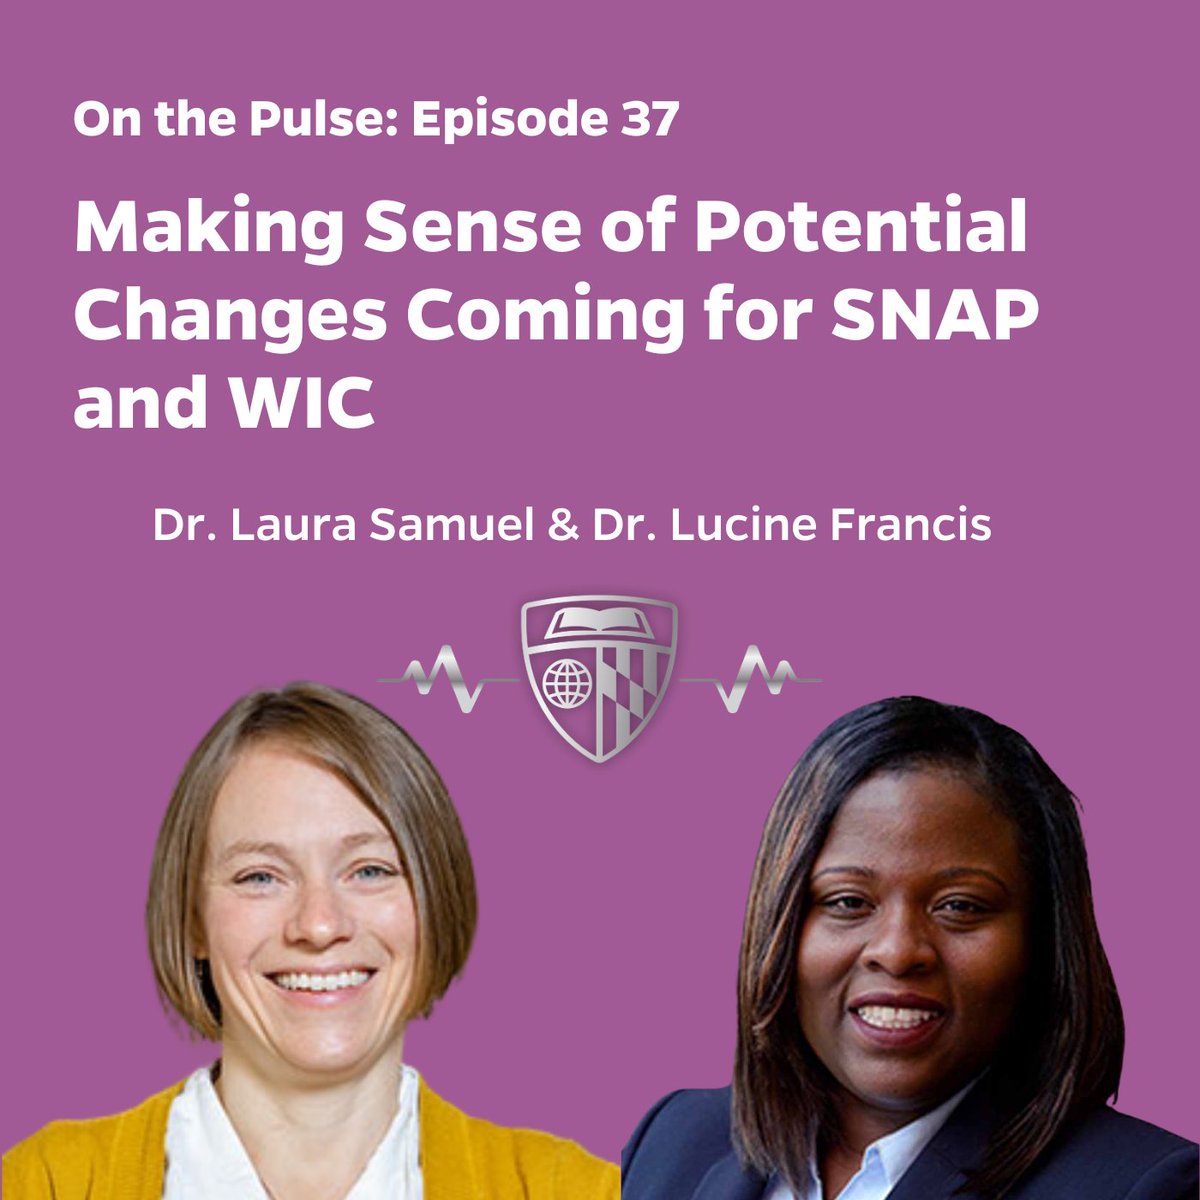 Check out the latest On The Pulse Podcast with Drs. @Laura_J_Samuel and Lucine Francis on the implications of the competing Farm Bills on the House floor on food assistance programs and why nurses’ voices are important in these discussions. bit.ly/3QYJrVo